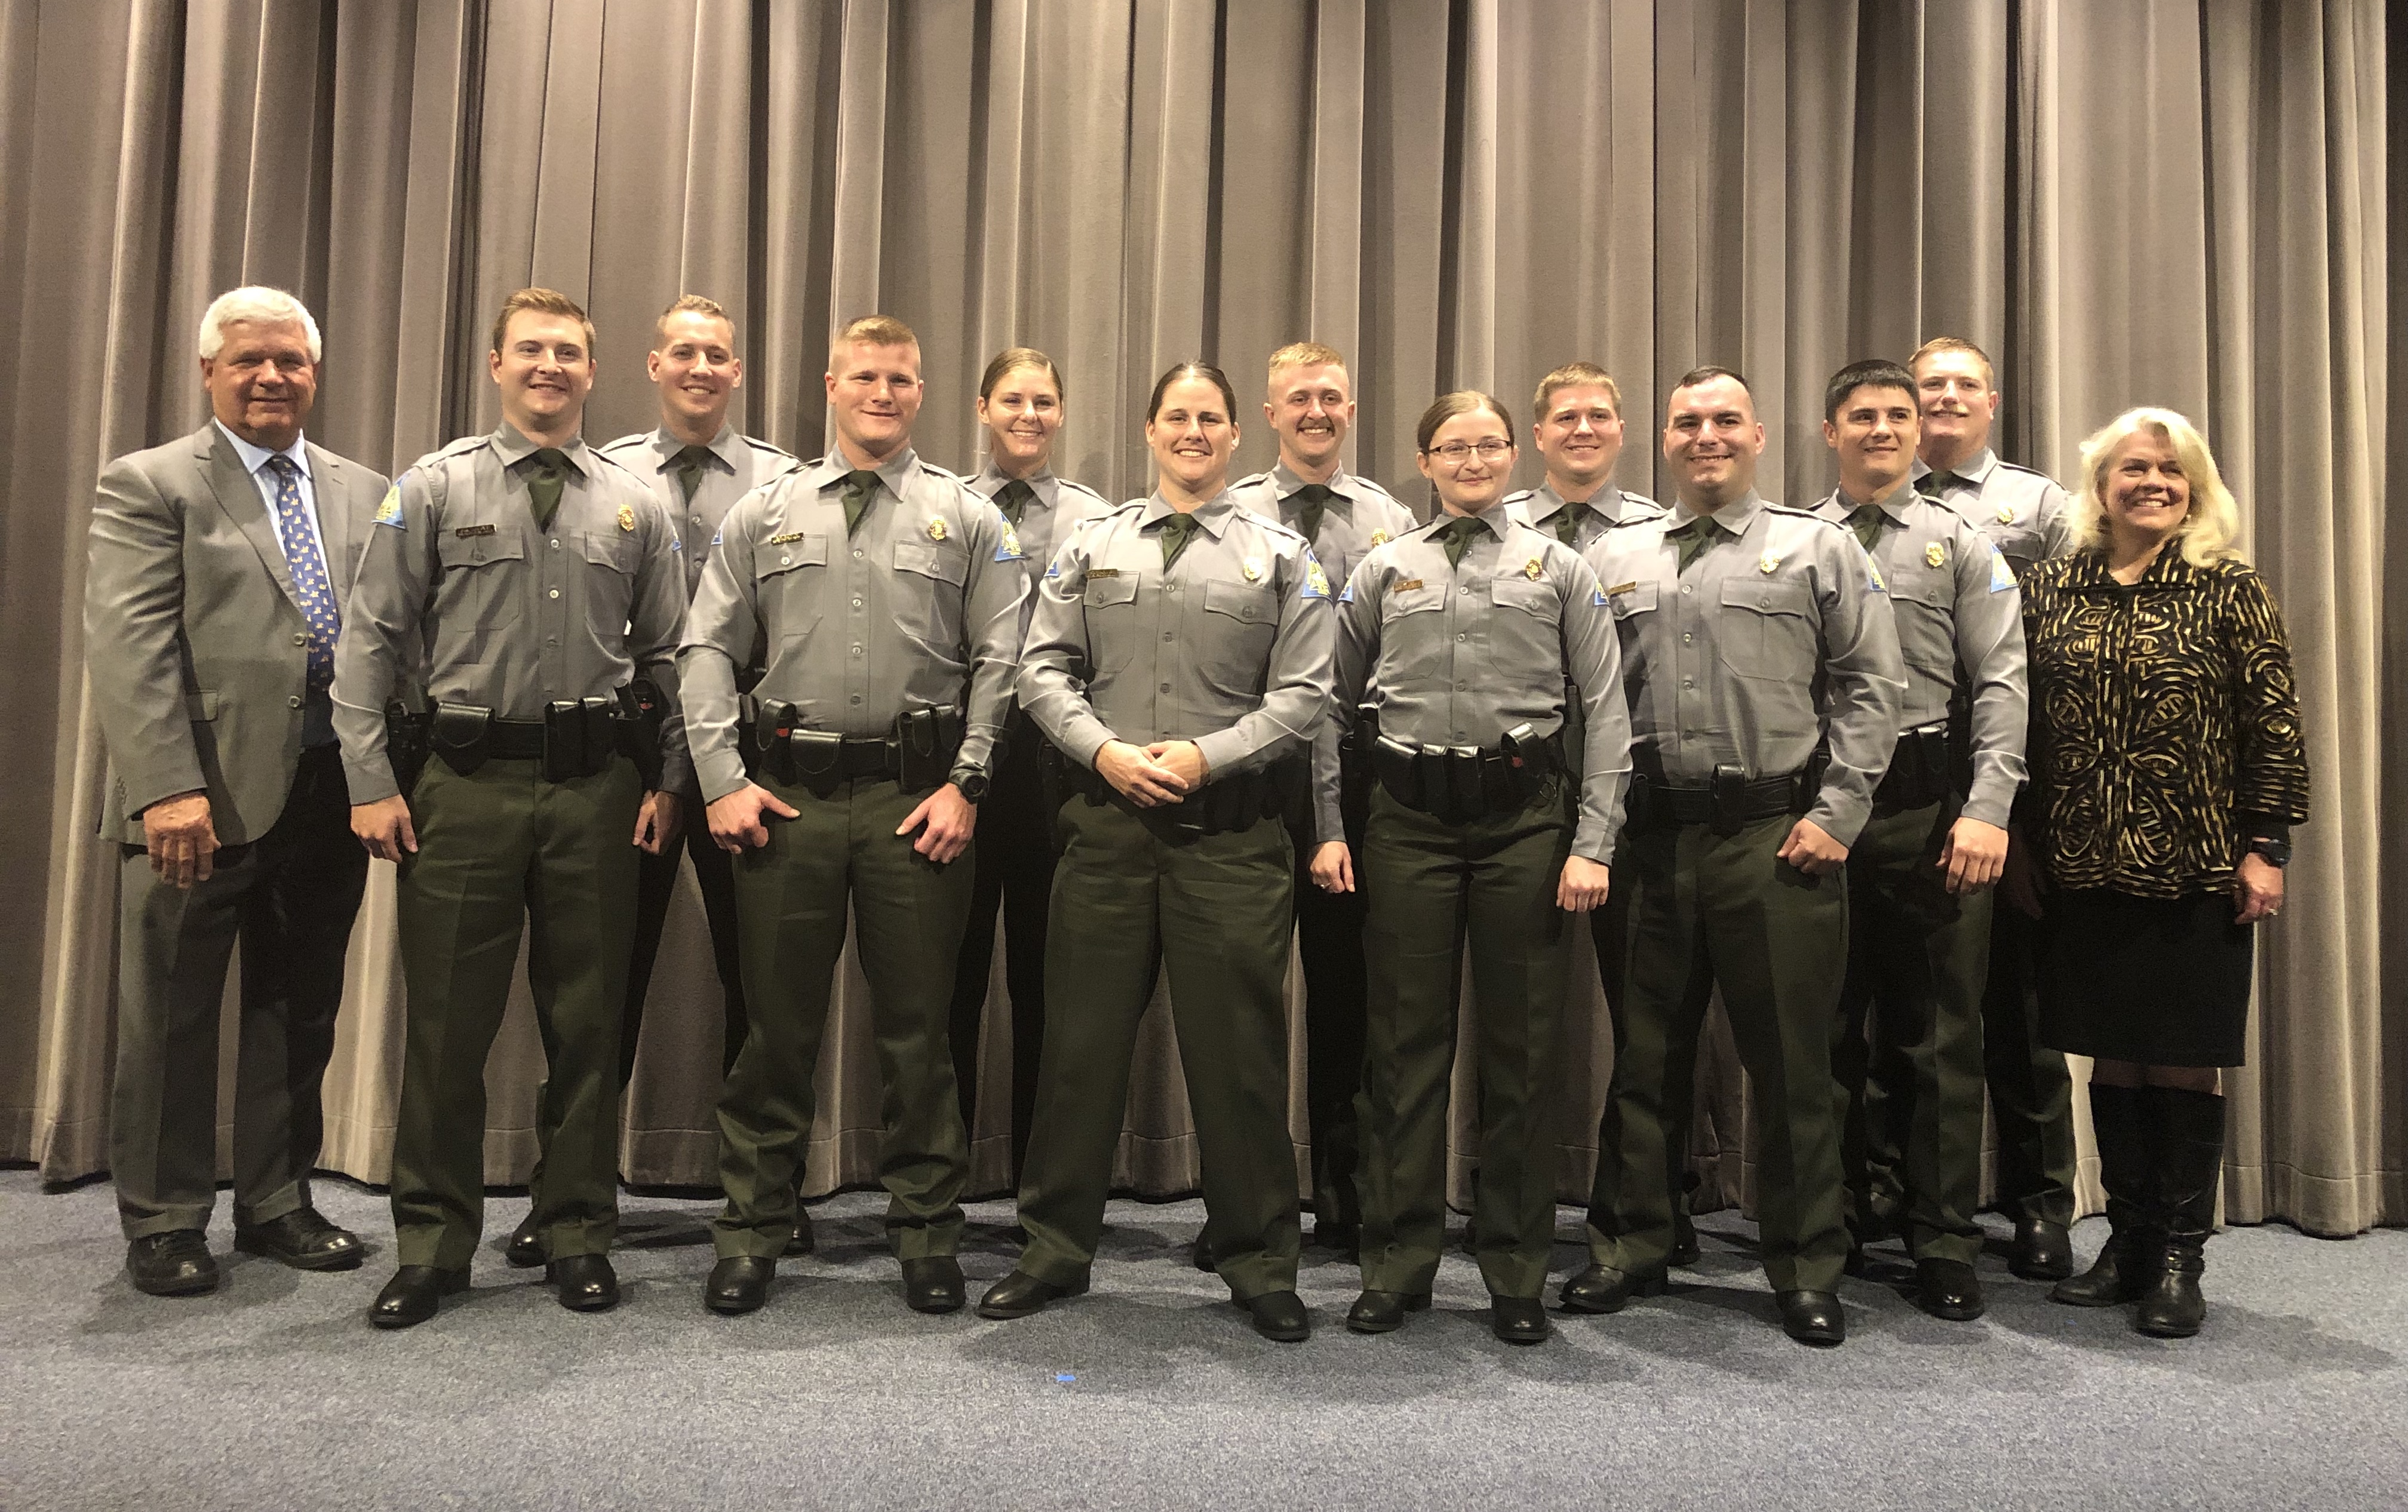 Group photo of Agent Graduating Class 2019